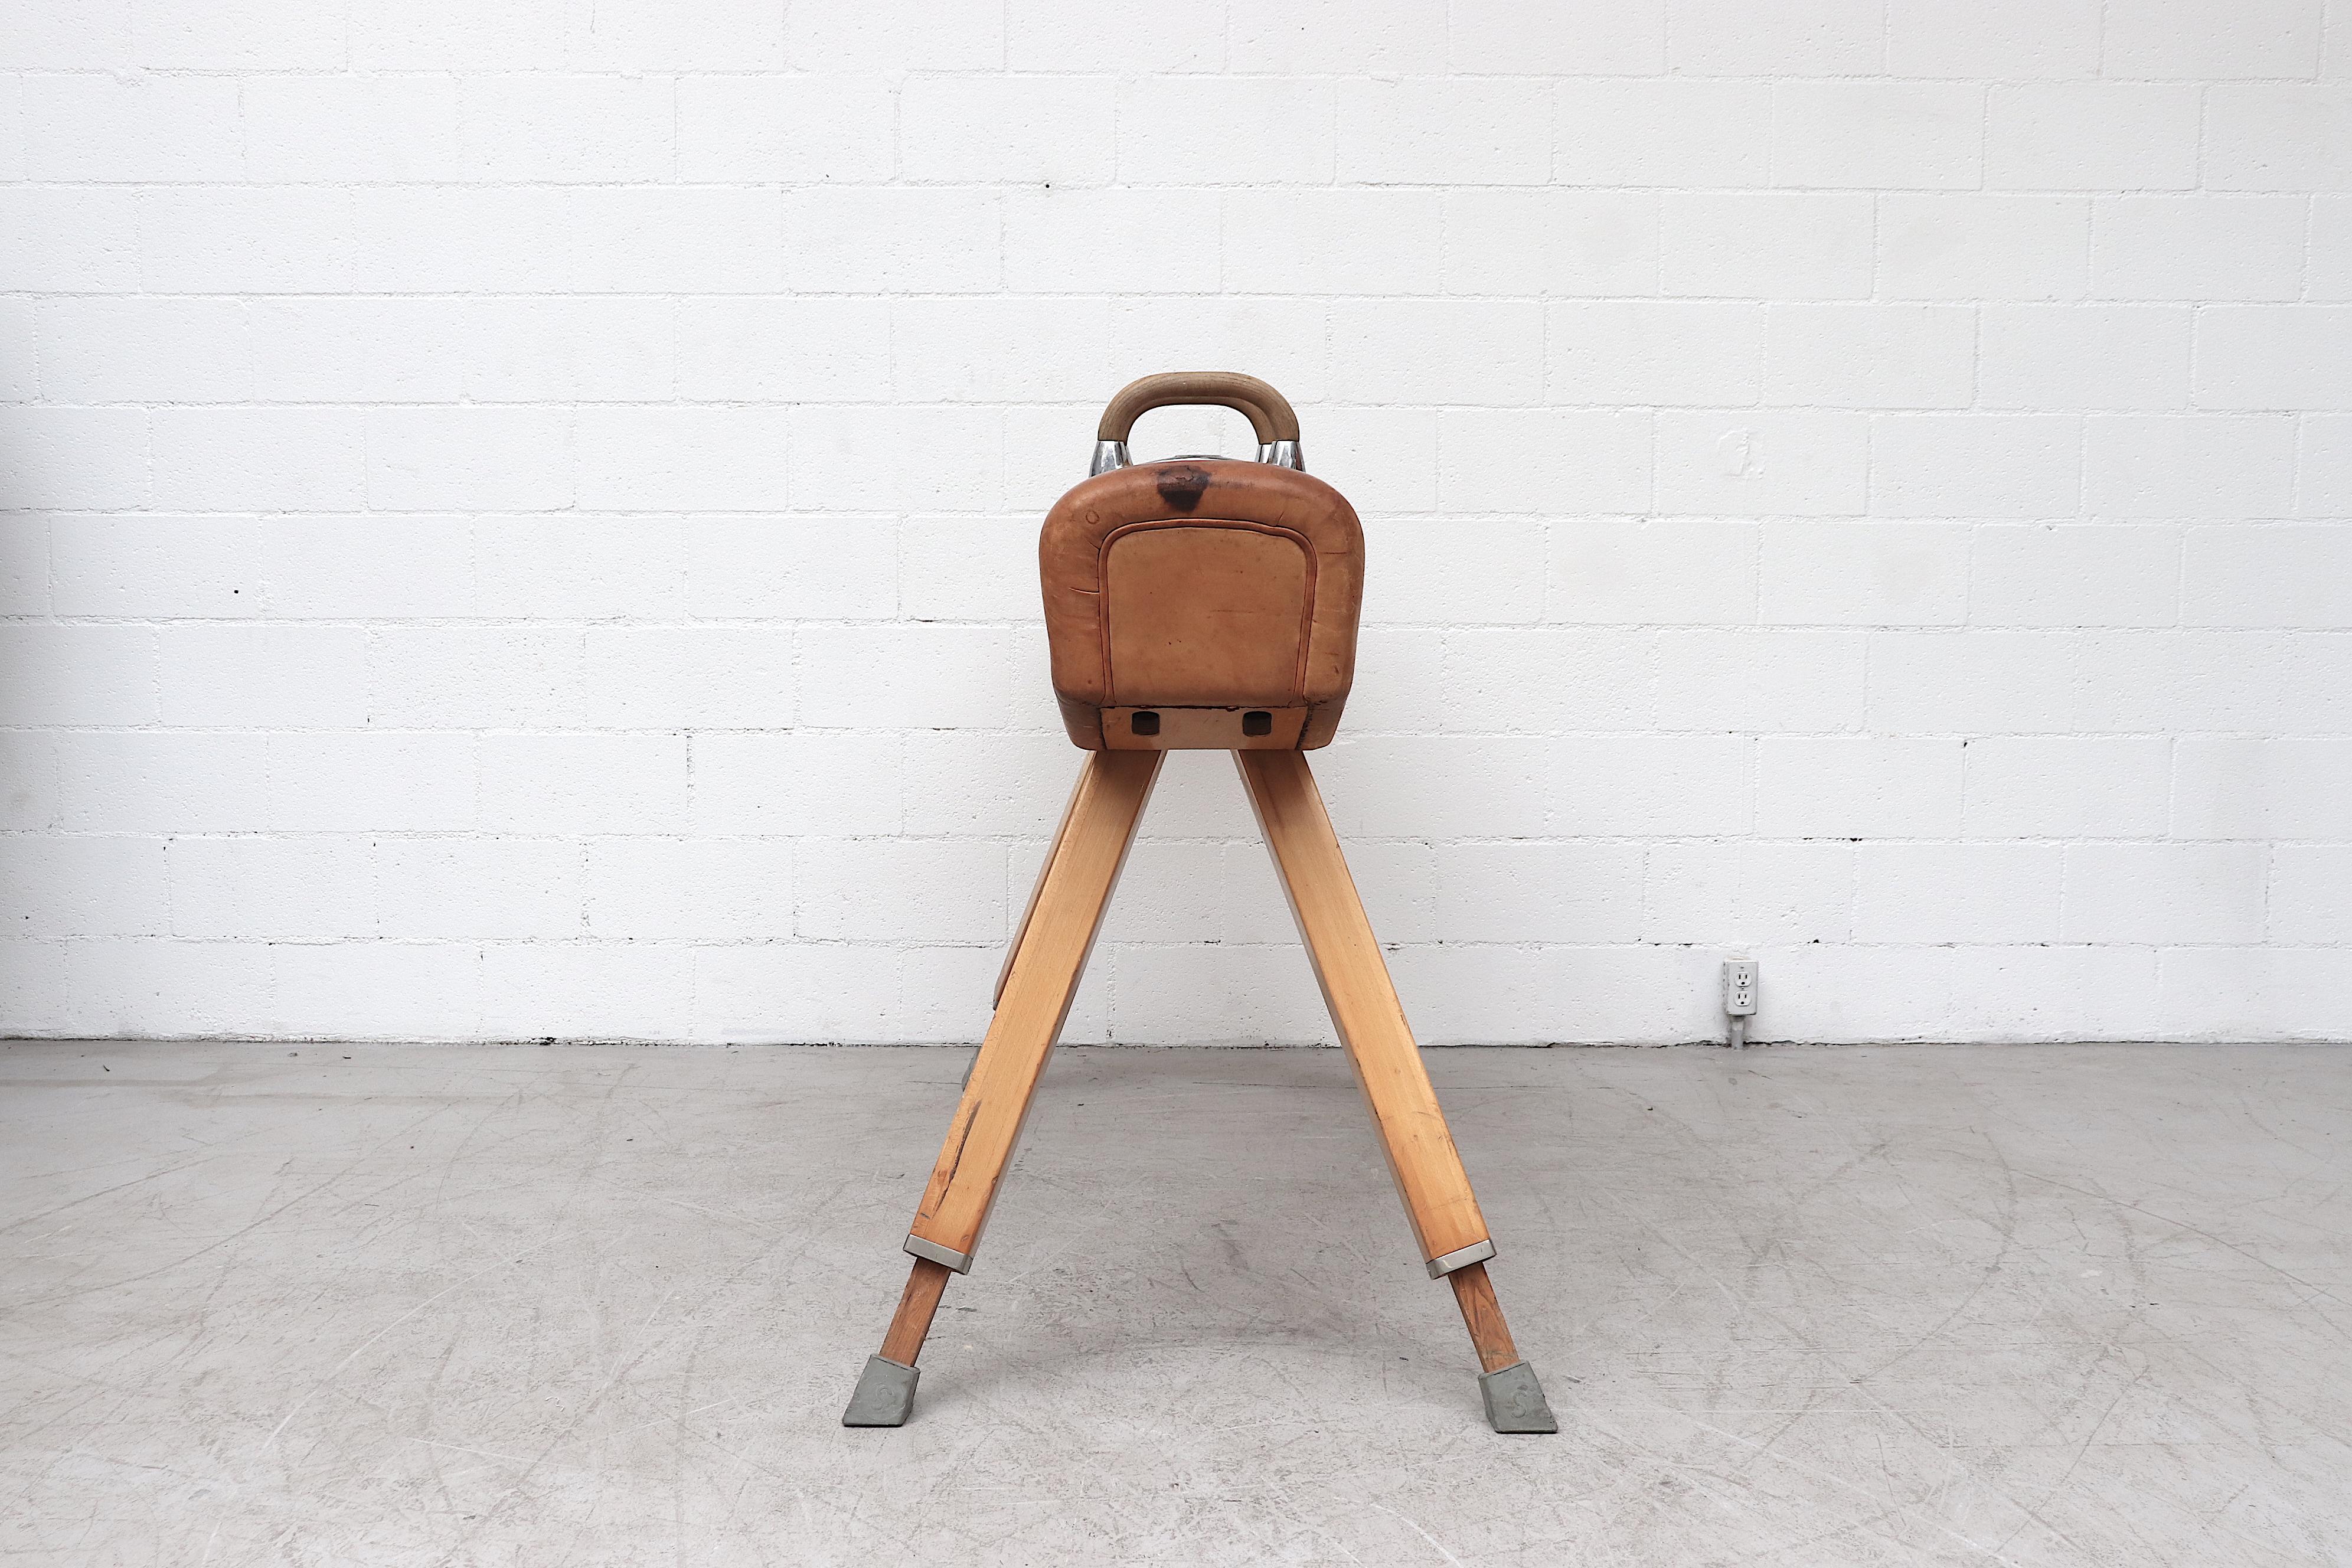 Awesome original 1960s Schelde international pummel horse with natural leather and original vaulting handles. In good overall condition with beautiful patina and height adjustable legs.